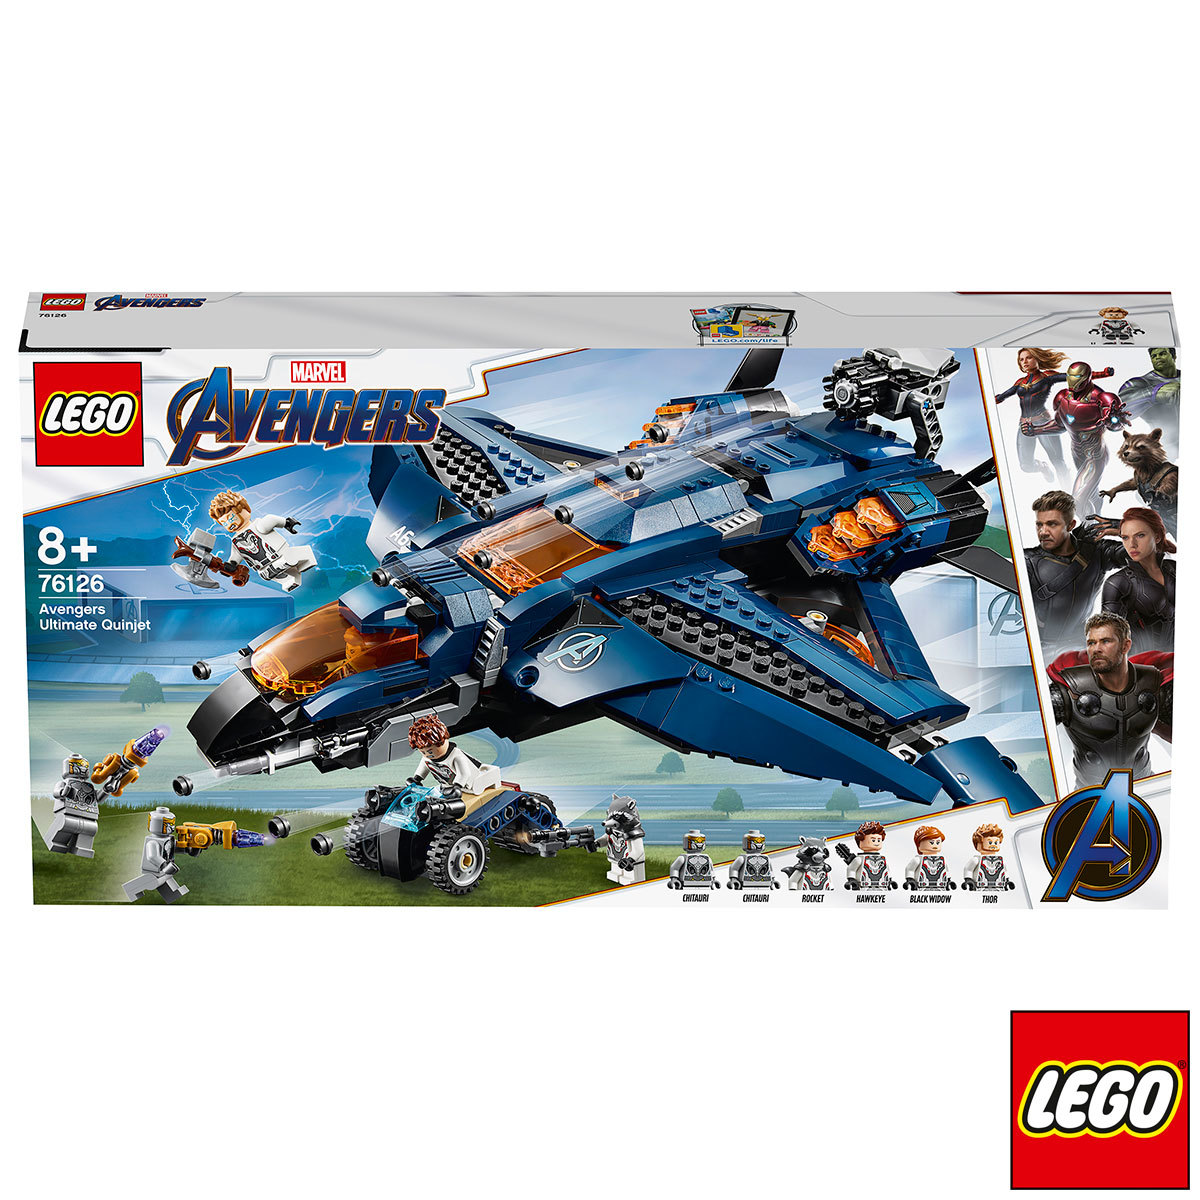 Avengers Ultimate Quinjet front item boxed